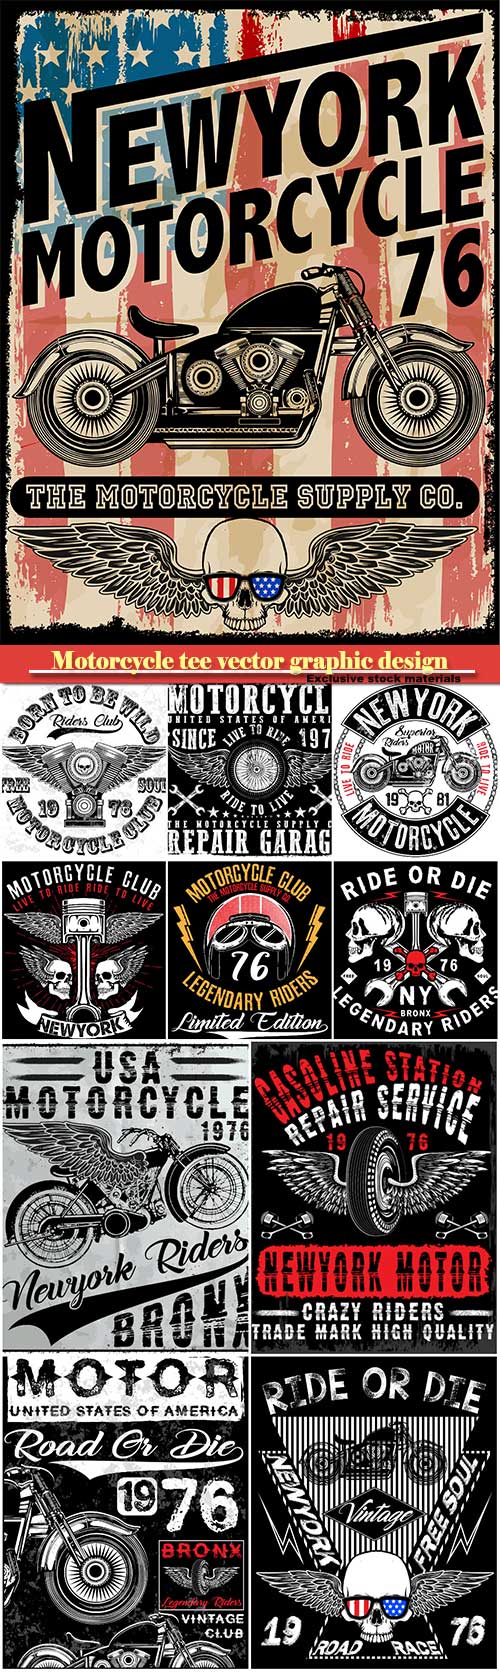 Motorcycle tee vector graphic design, motorcycle label t-shirt design with illustration